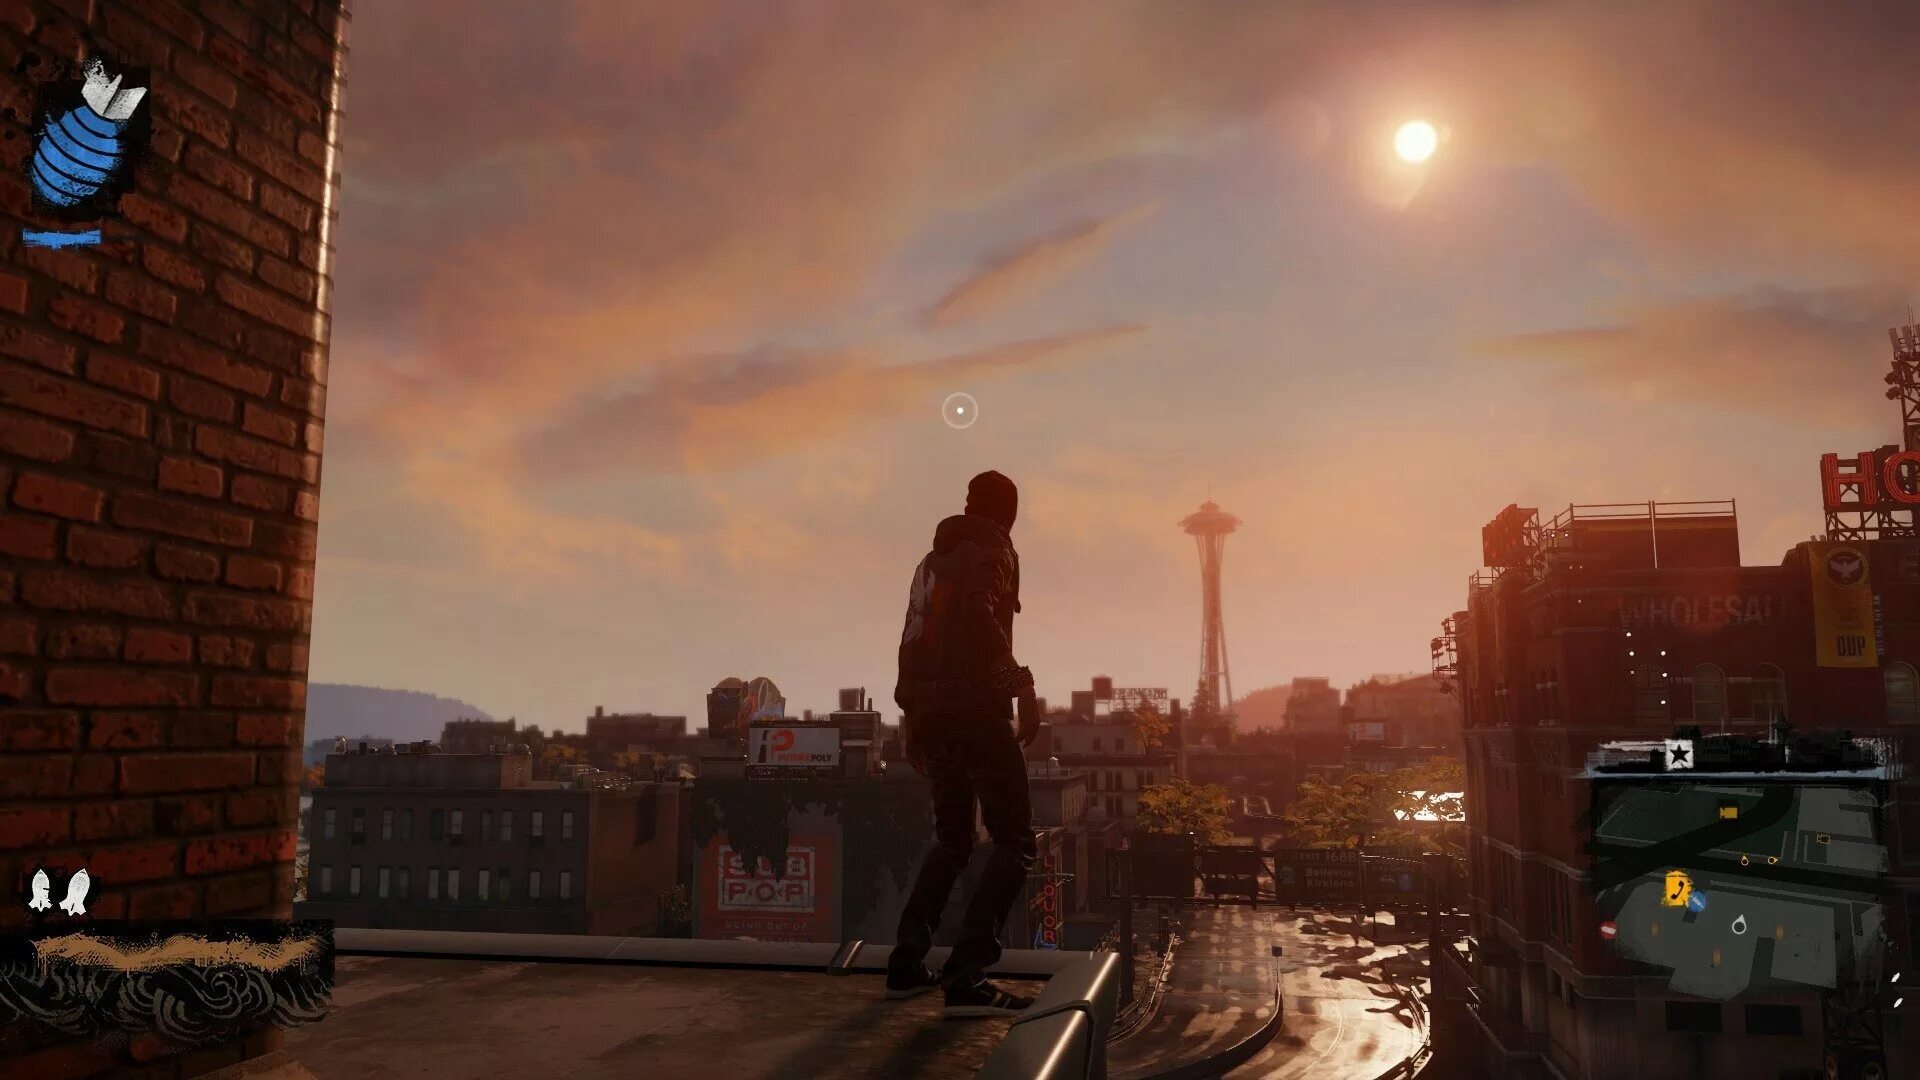 Infamous second son Gameplay. Second son геймплей. Infamous second son геймплей. Second son Gameplay. New son son 2